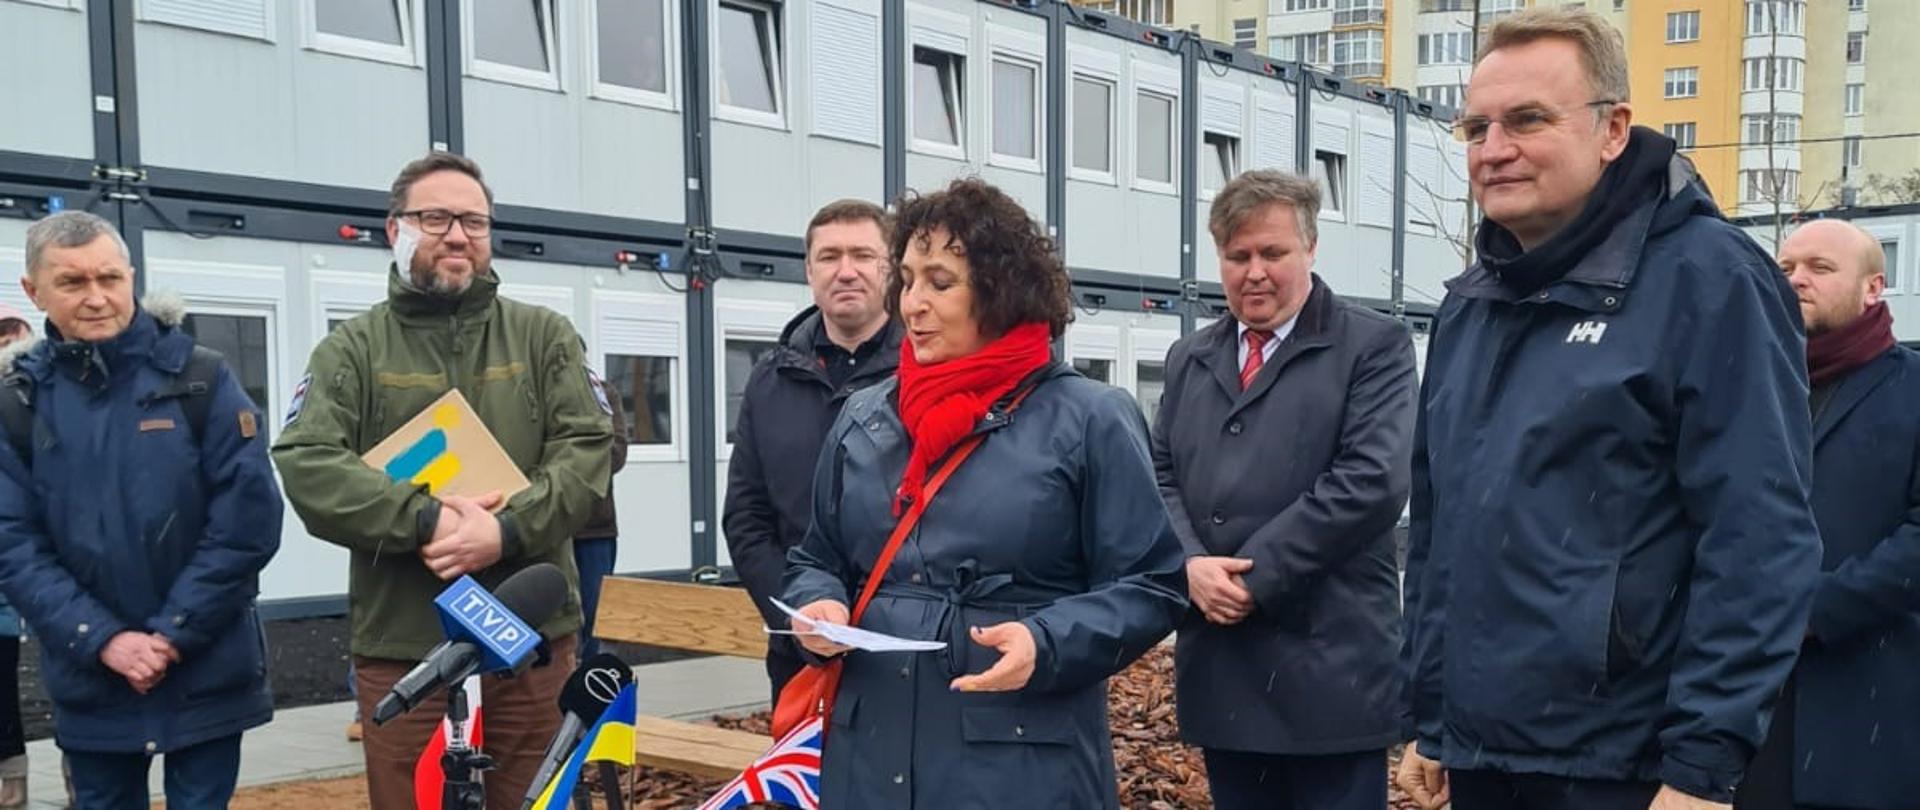 Official delivery of temporary shelters in Lviv under the new Polish-UK partnership